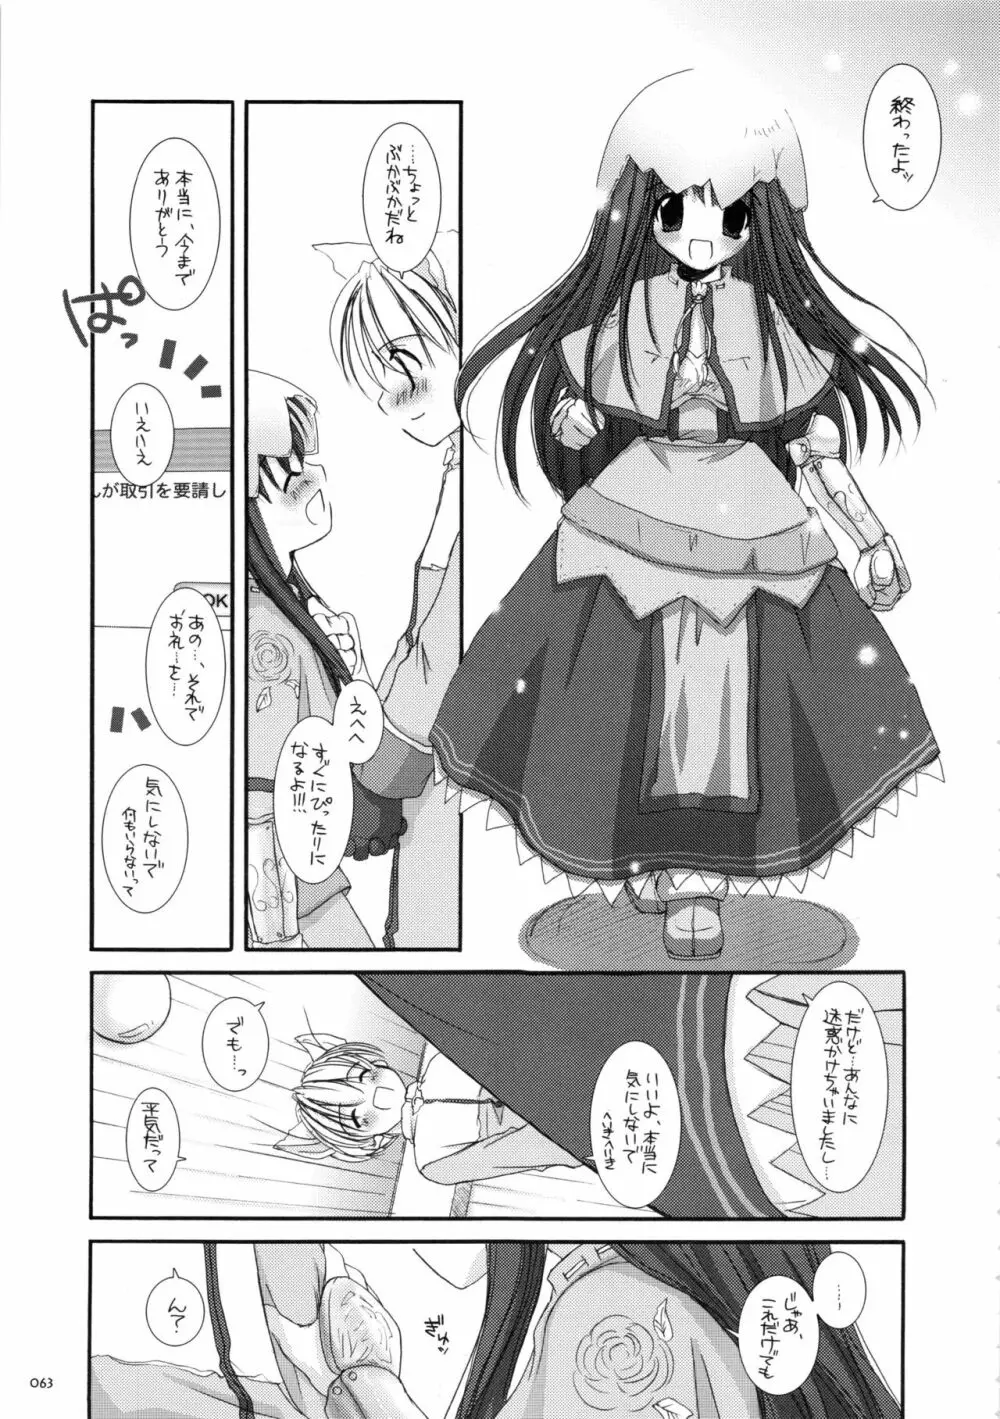 DL-RO総集編01 - page62